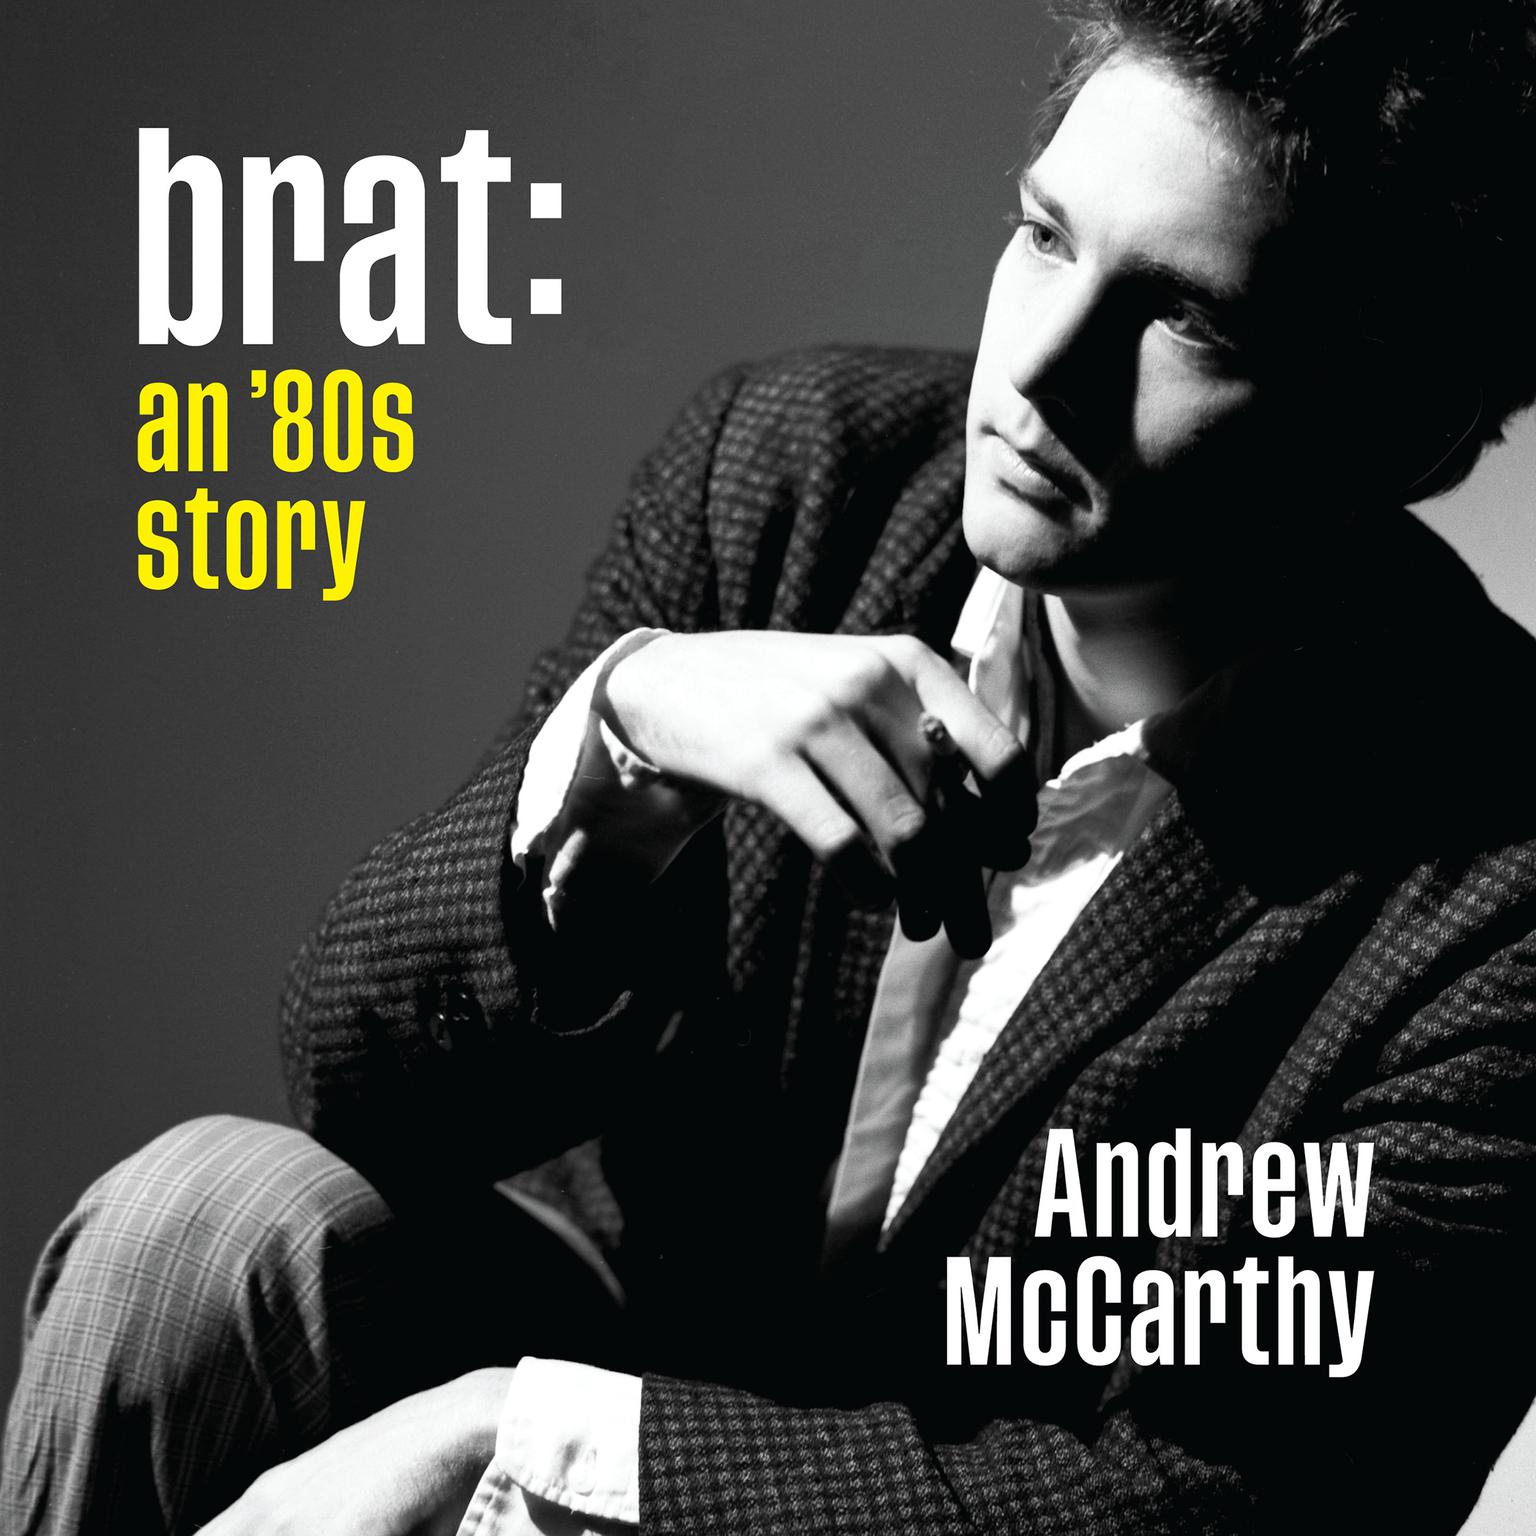 Brat: An 80s Story Audiobook, by Andrew McCarthy